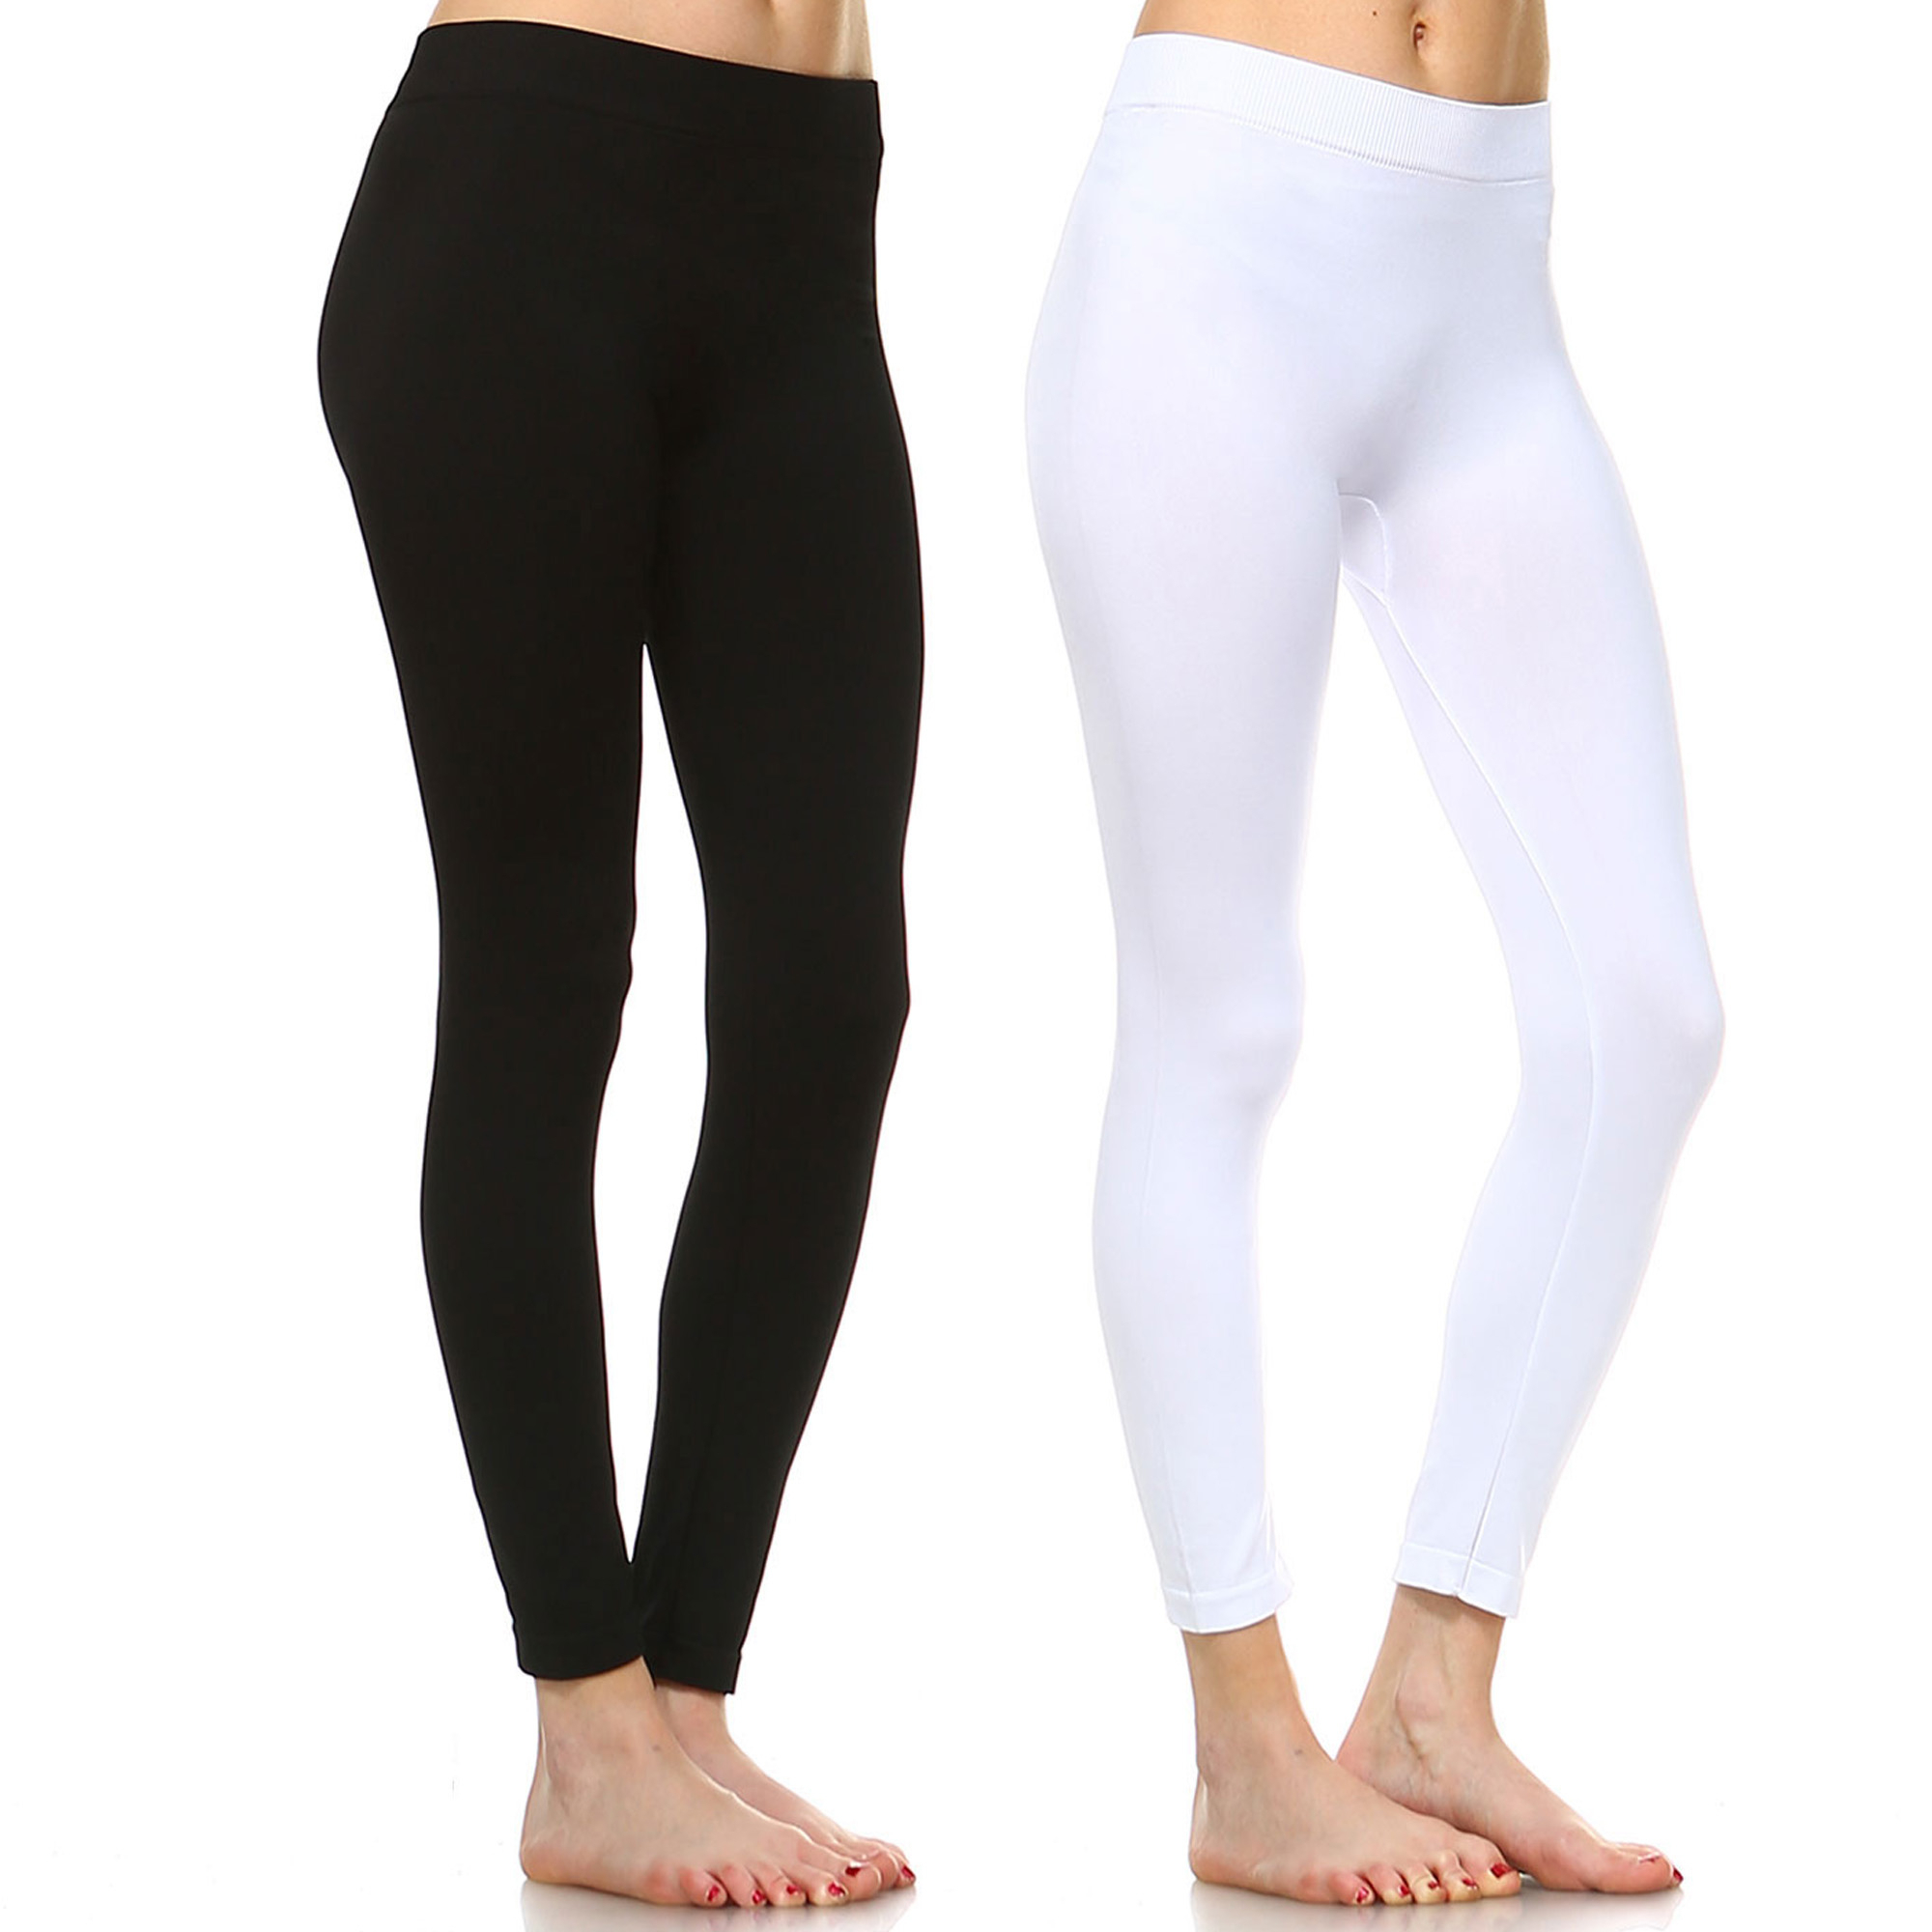 White Mark Women's Pack Of 2 Solid Color Leggings - Black, Navy, One Size - Plus